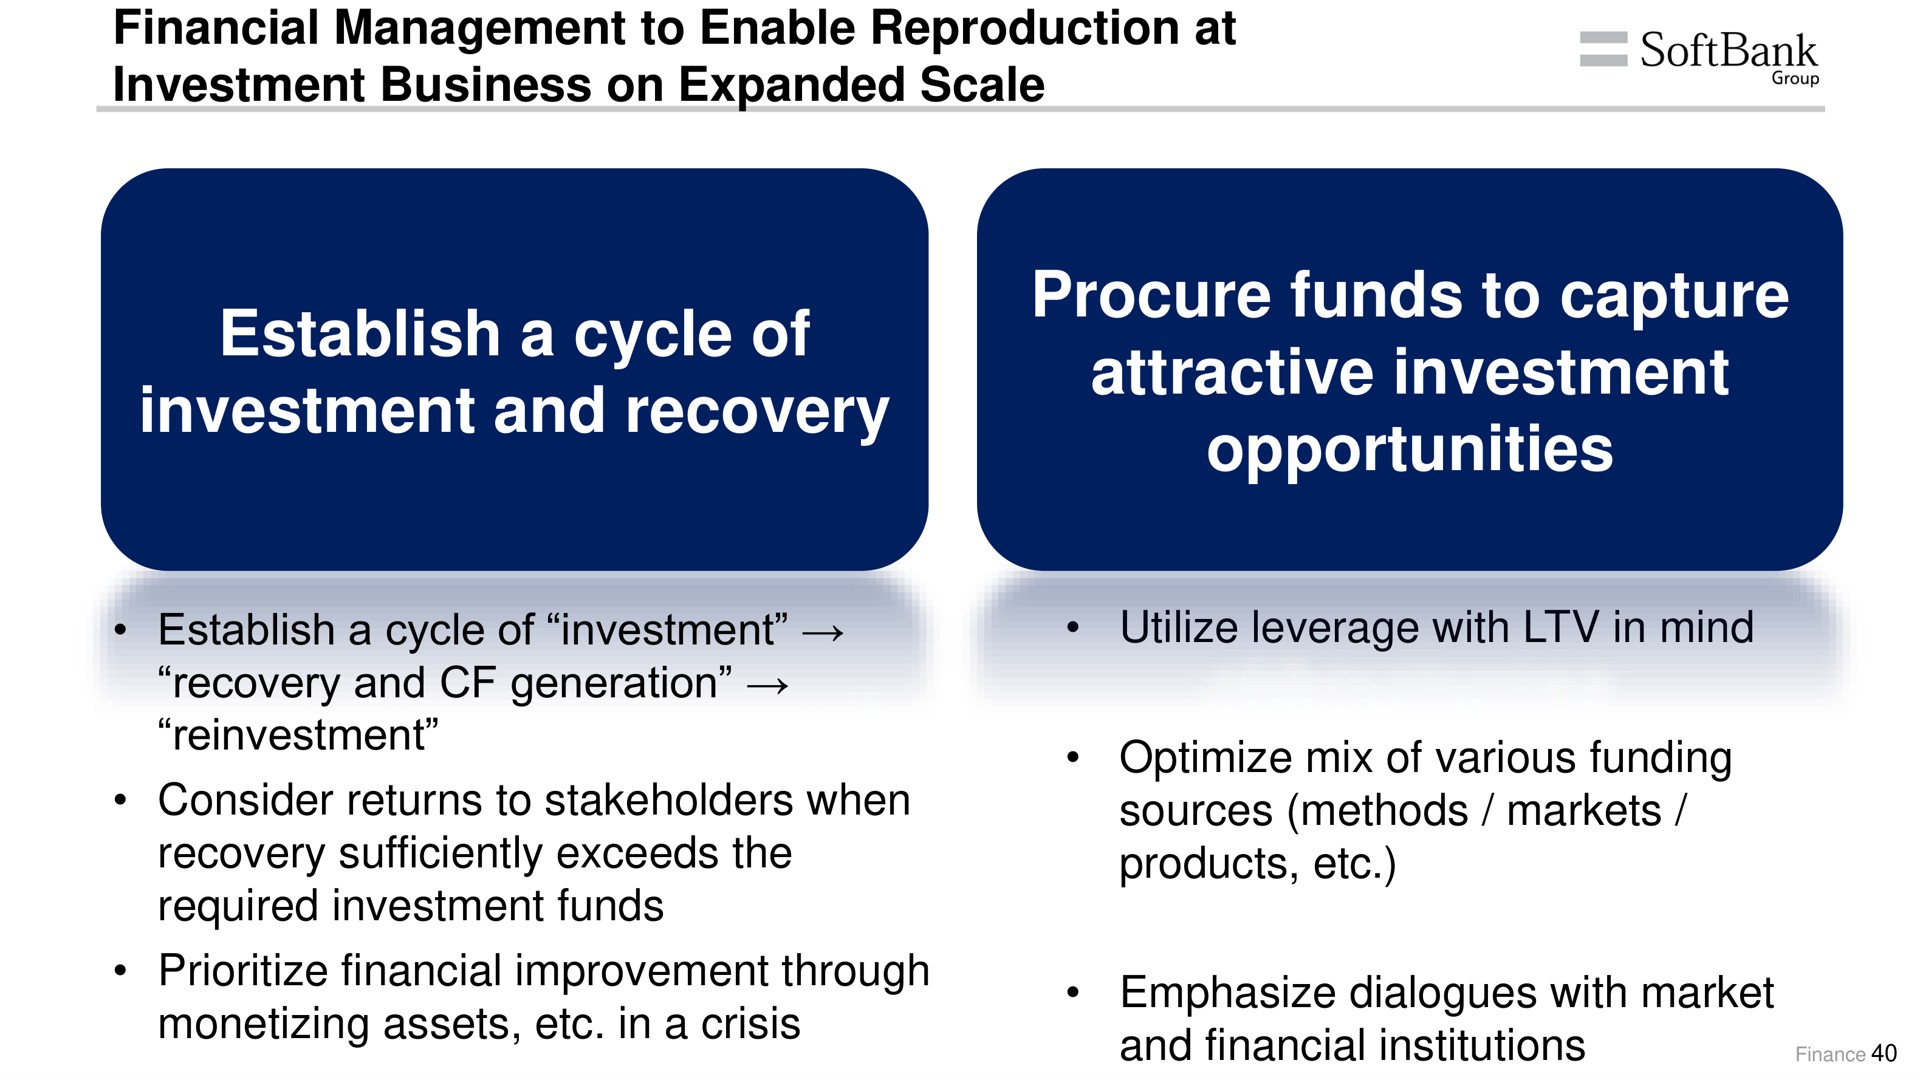 financial management to enable reproduction at investment business on expanded scale establish a cycle of investment and recovery procure funds to capture attractive investment opportunities establish a cycle of investment recovery and generation reinvestment consider returns to stakeholders when recovery sufficiently exceeds the required investment funds financial improvement through monetizing assets in a crisis utilize leverage with in mind optimize mix of various funding sources methods markets products emphasize dialogues with market and financial institutions croup ides | SoftBank